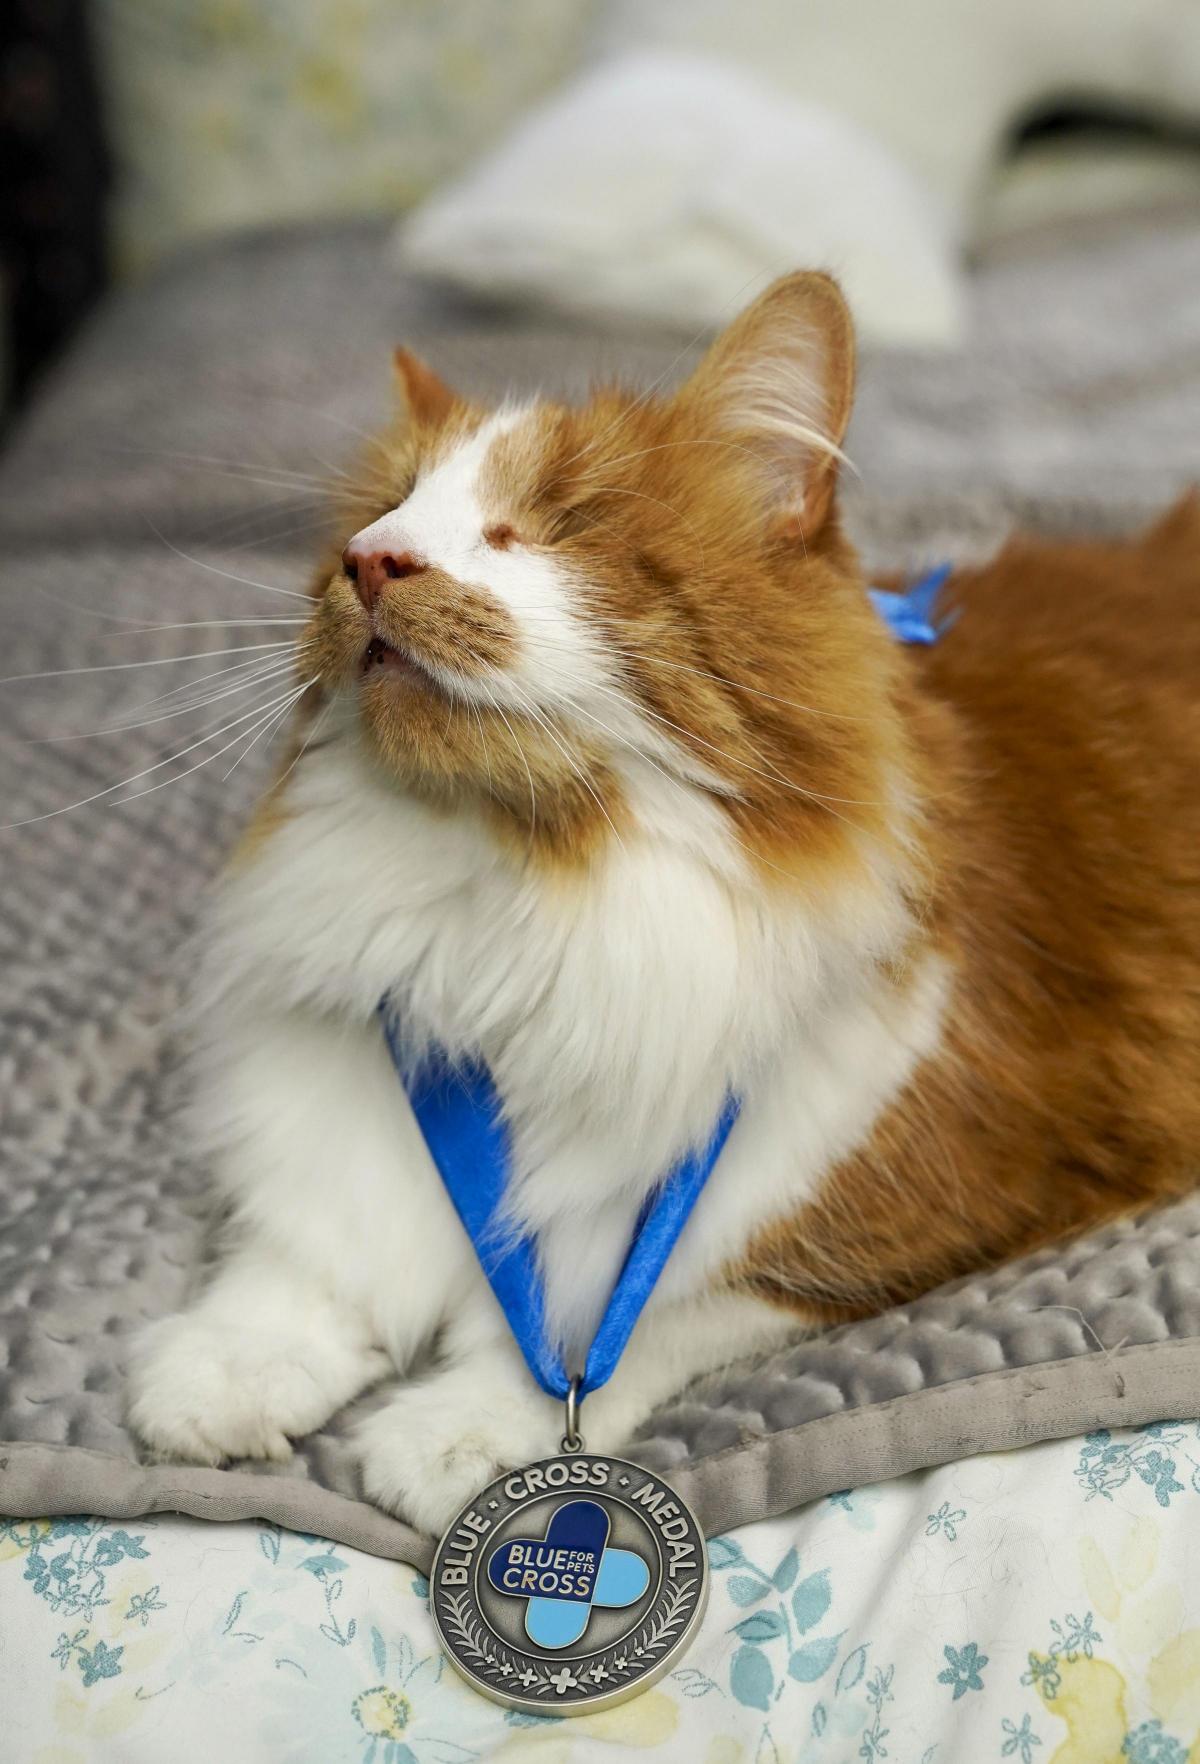 Carrots, the UK's only blind therapy cat